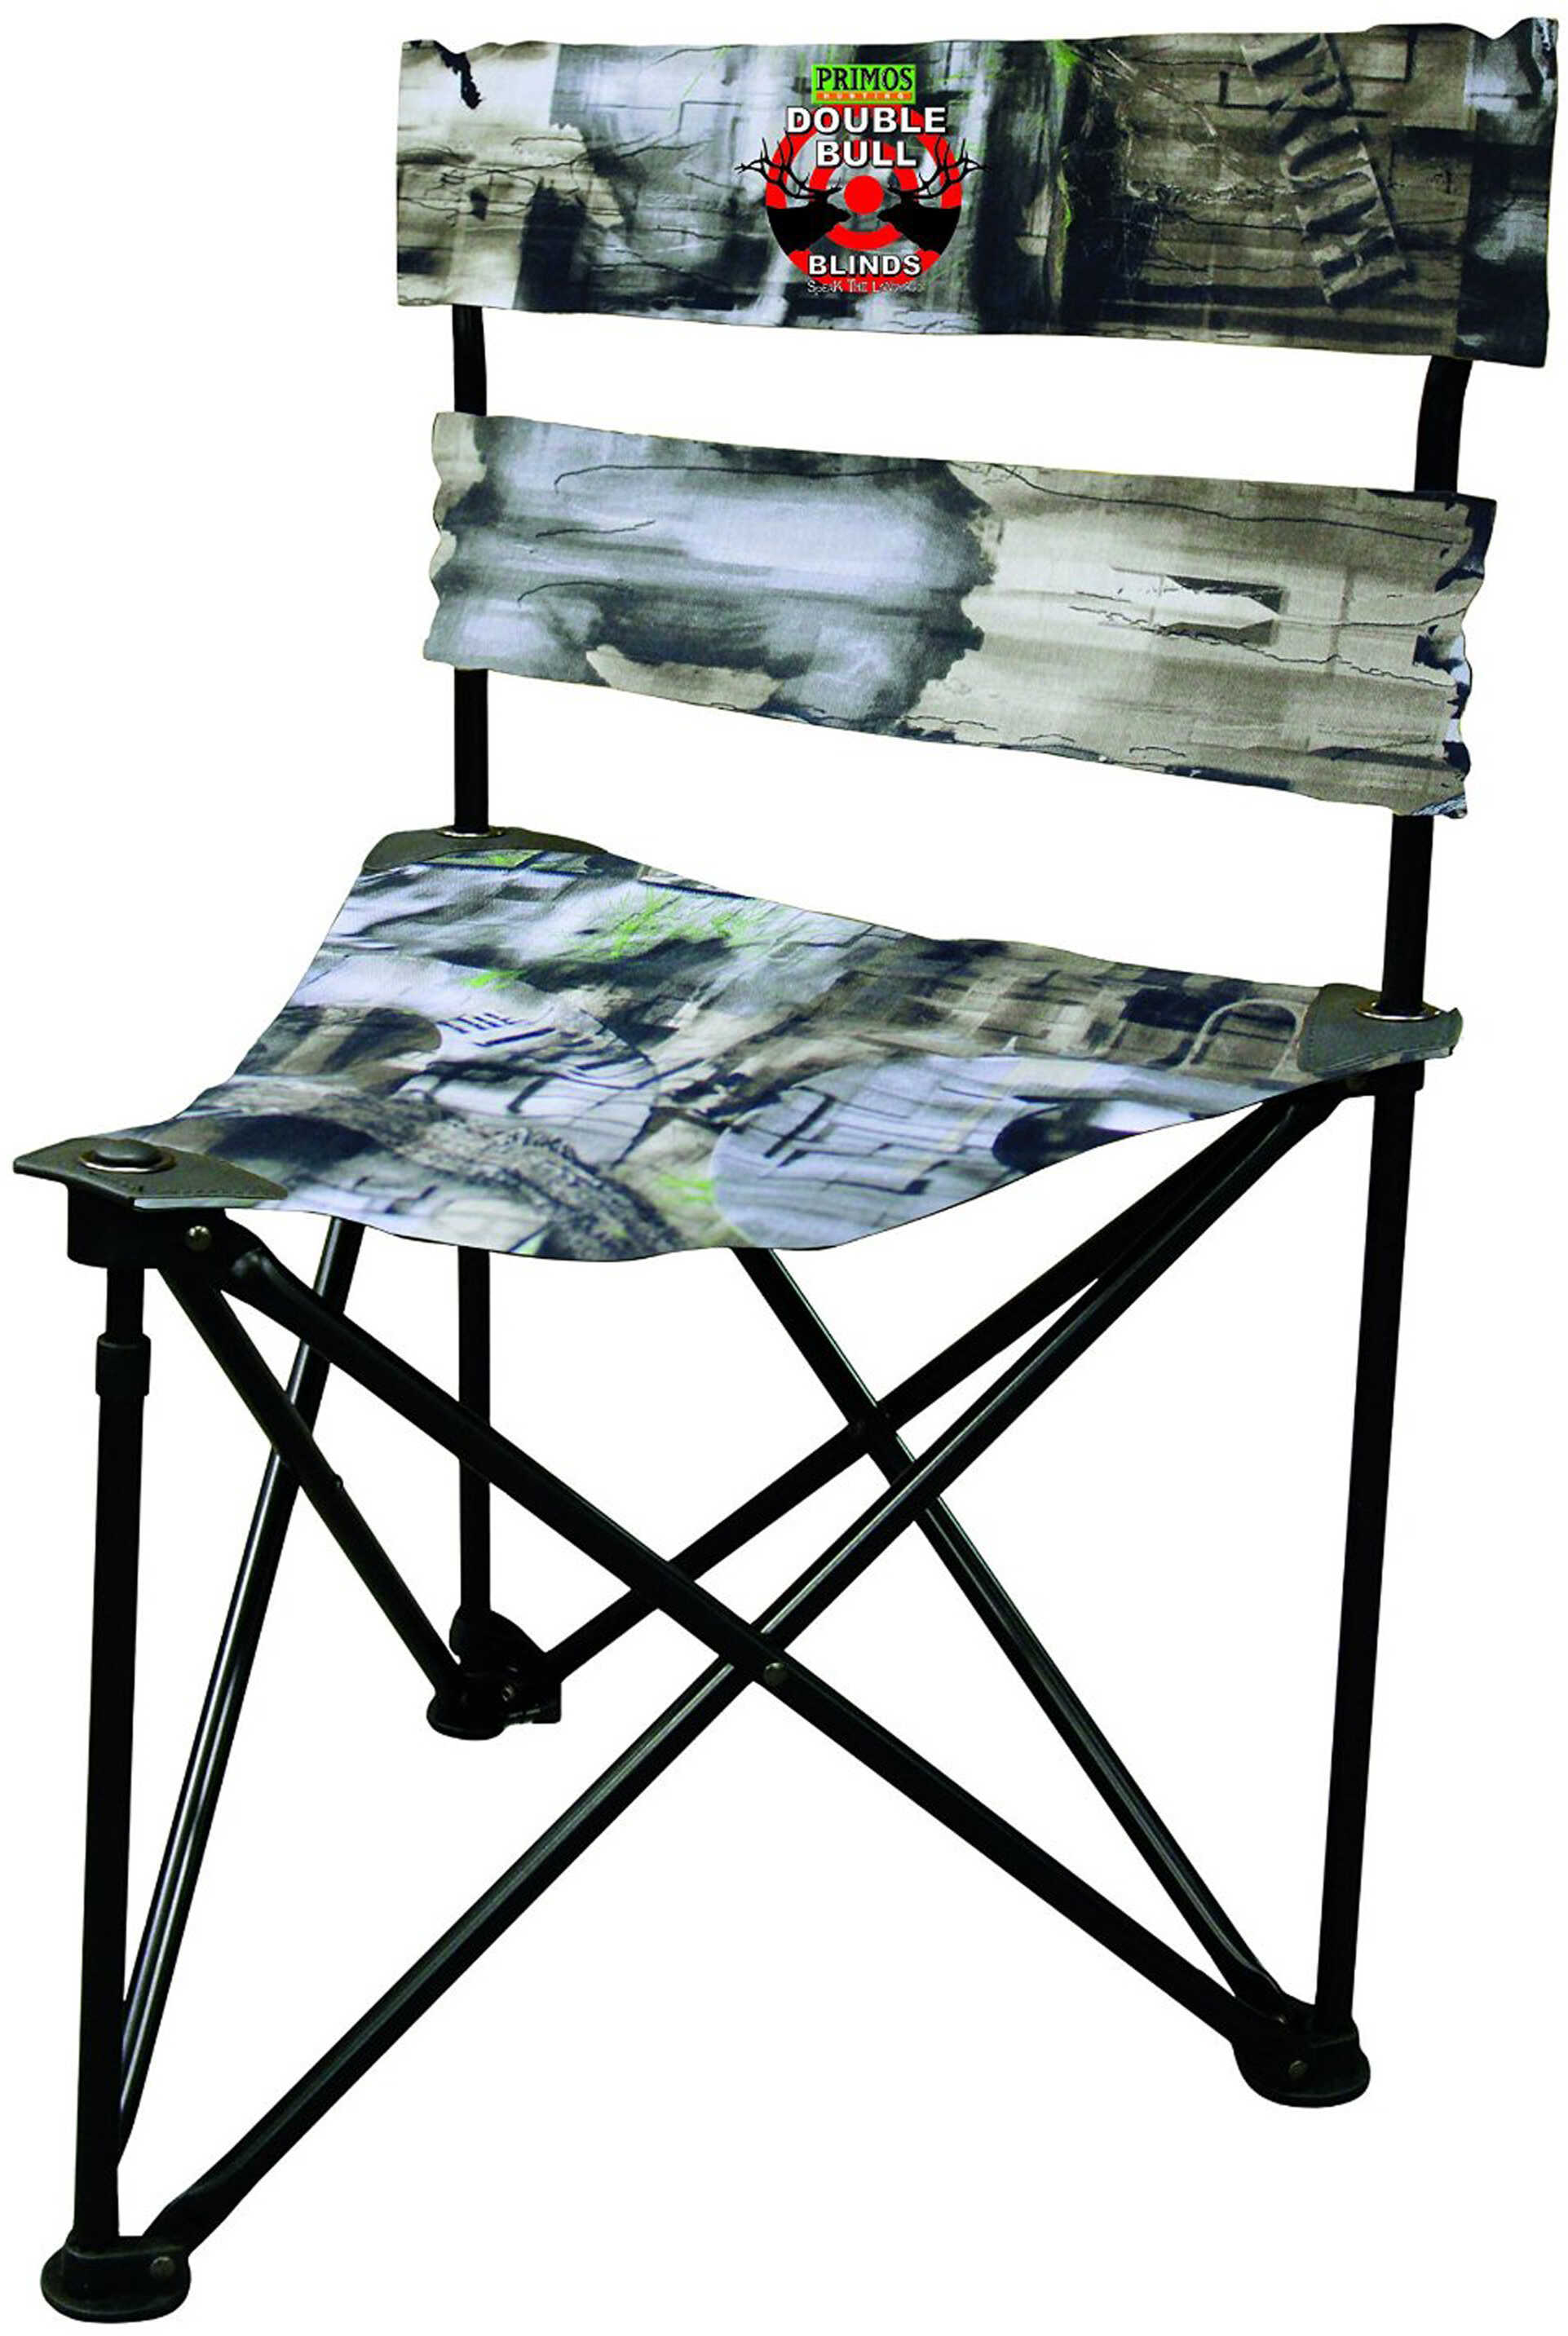 Primos Double Bull Tri Stool, Truth Camouflage Md: PS60085